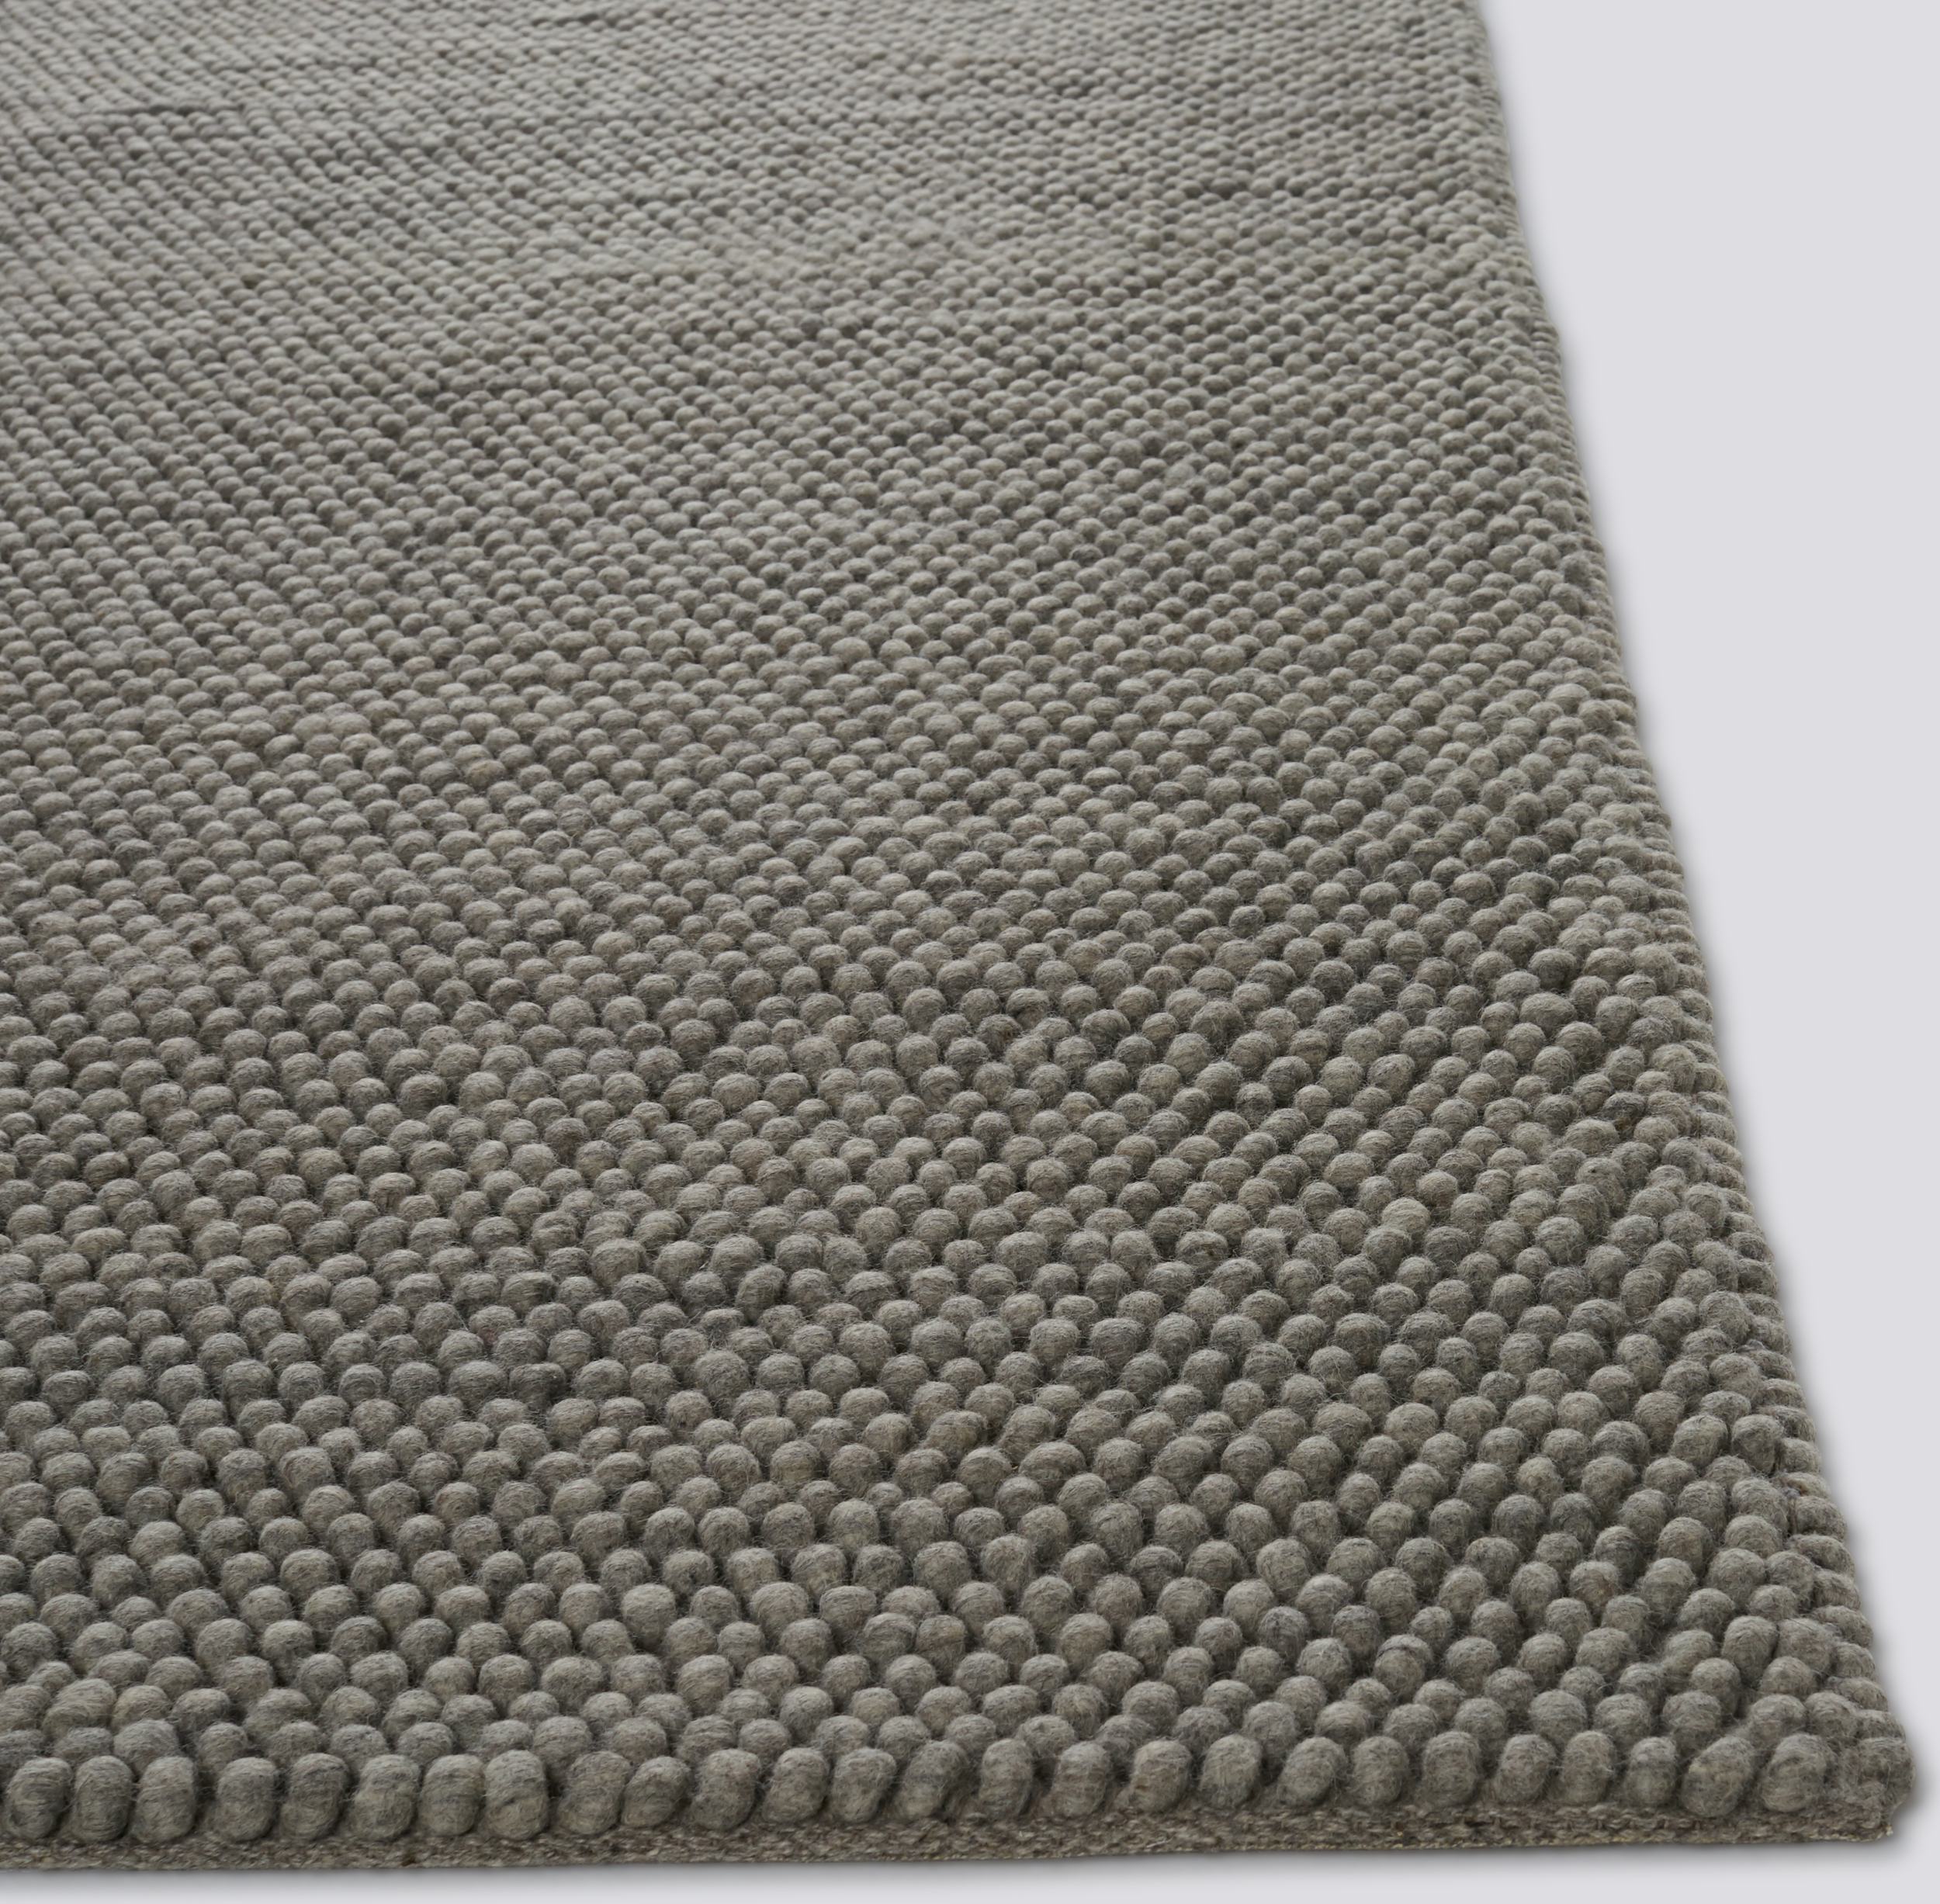 Unraveling Rug Pads: A Carpet to Carpet Rug Pad Story. - Carpet Cleaning  Force